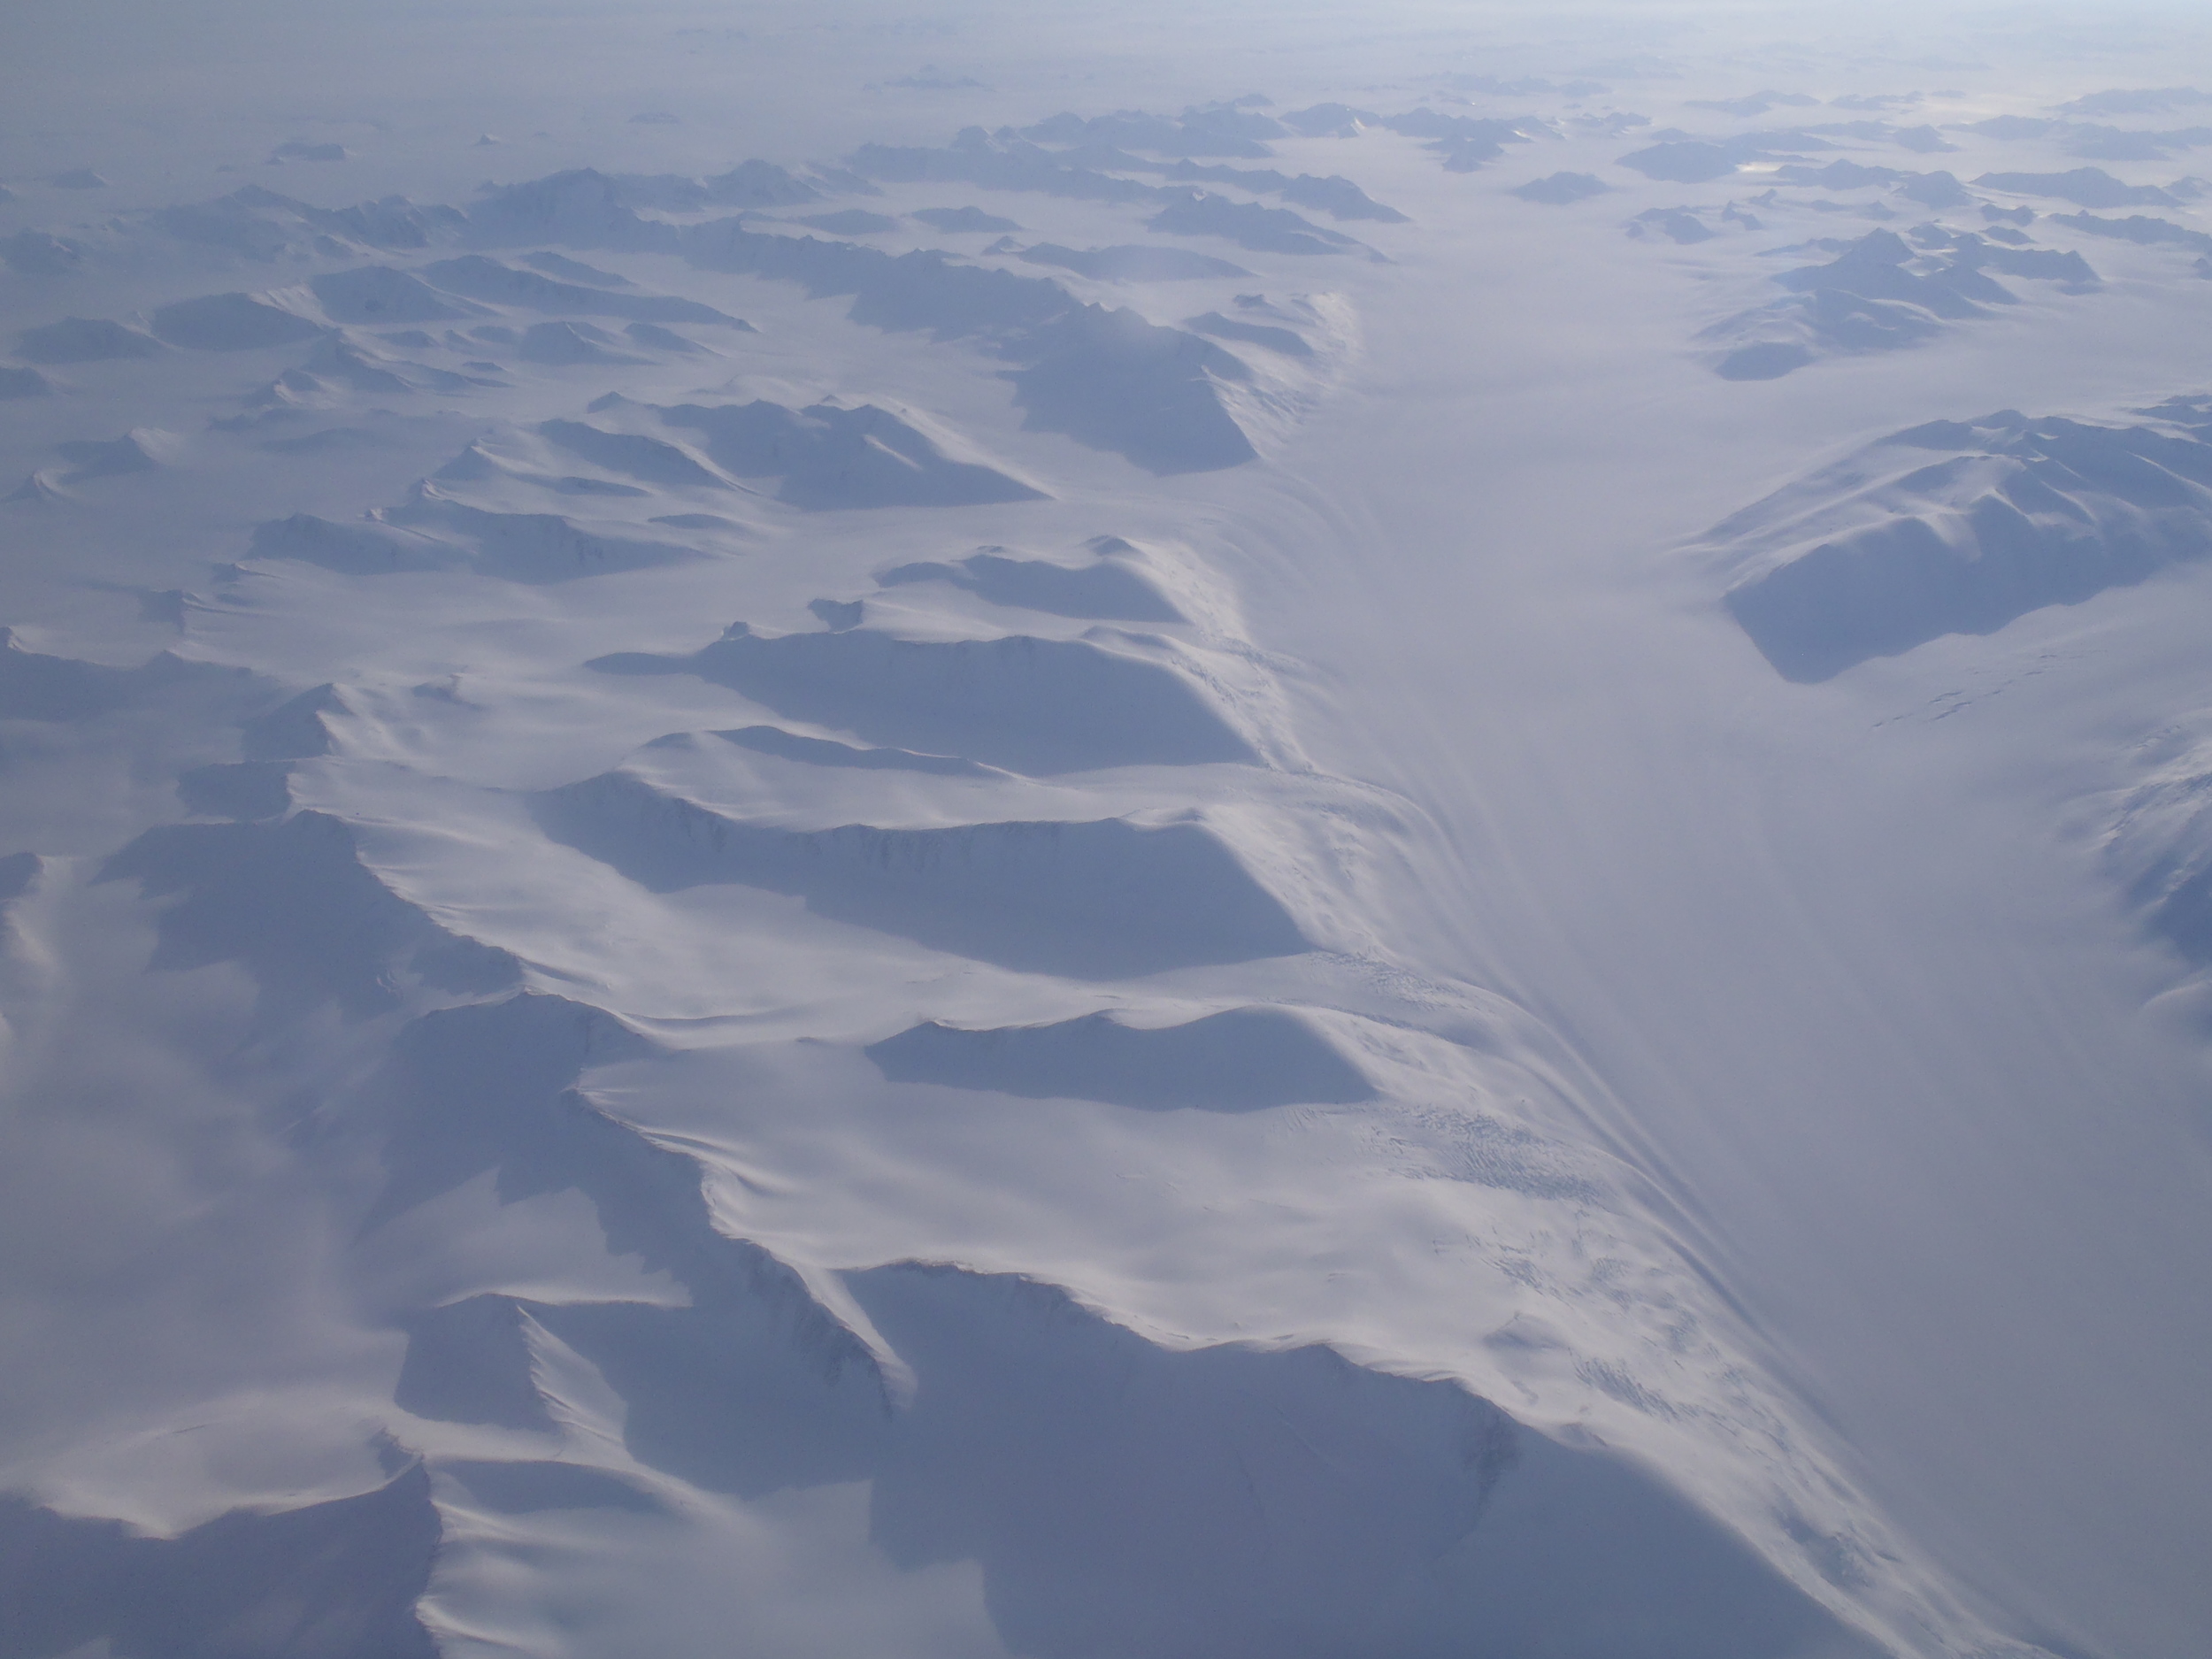  Antarctica from the window of the C-17.&nbsp; Almost there! 